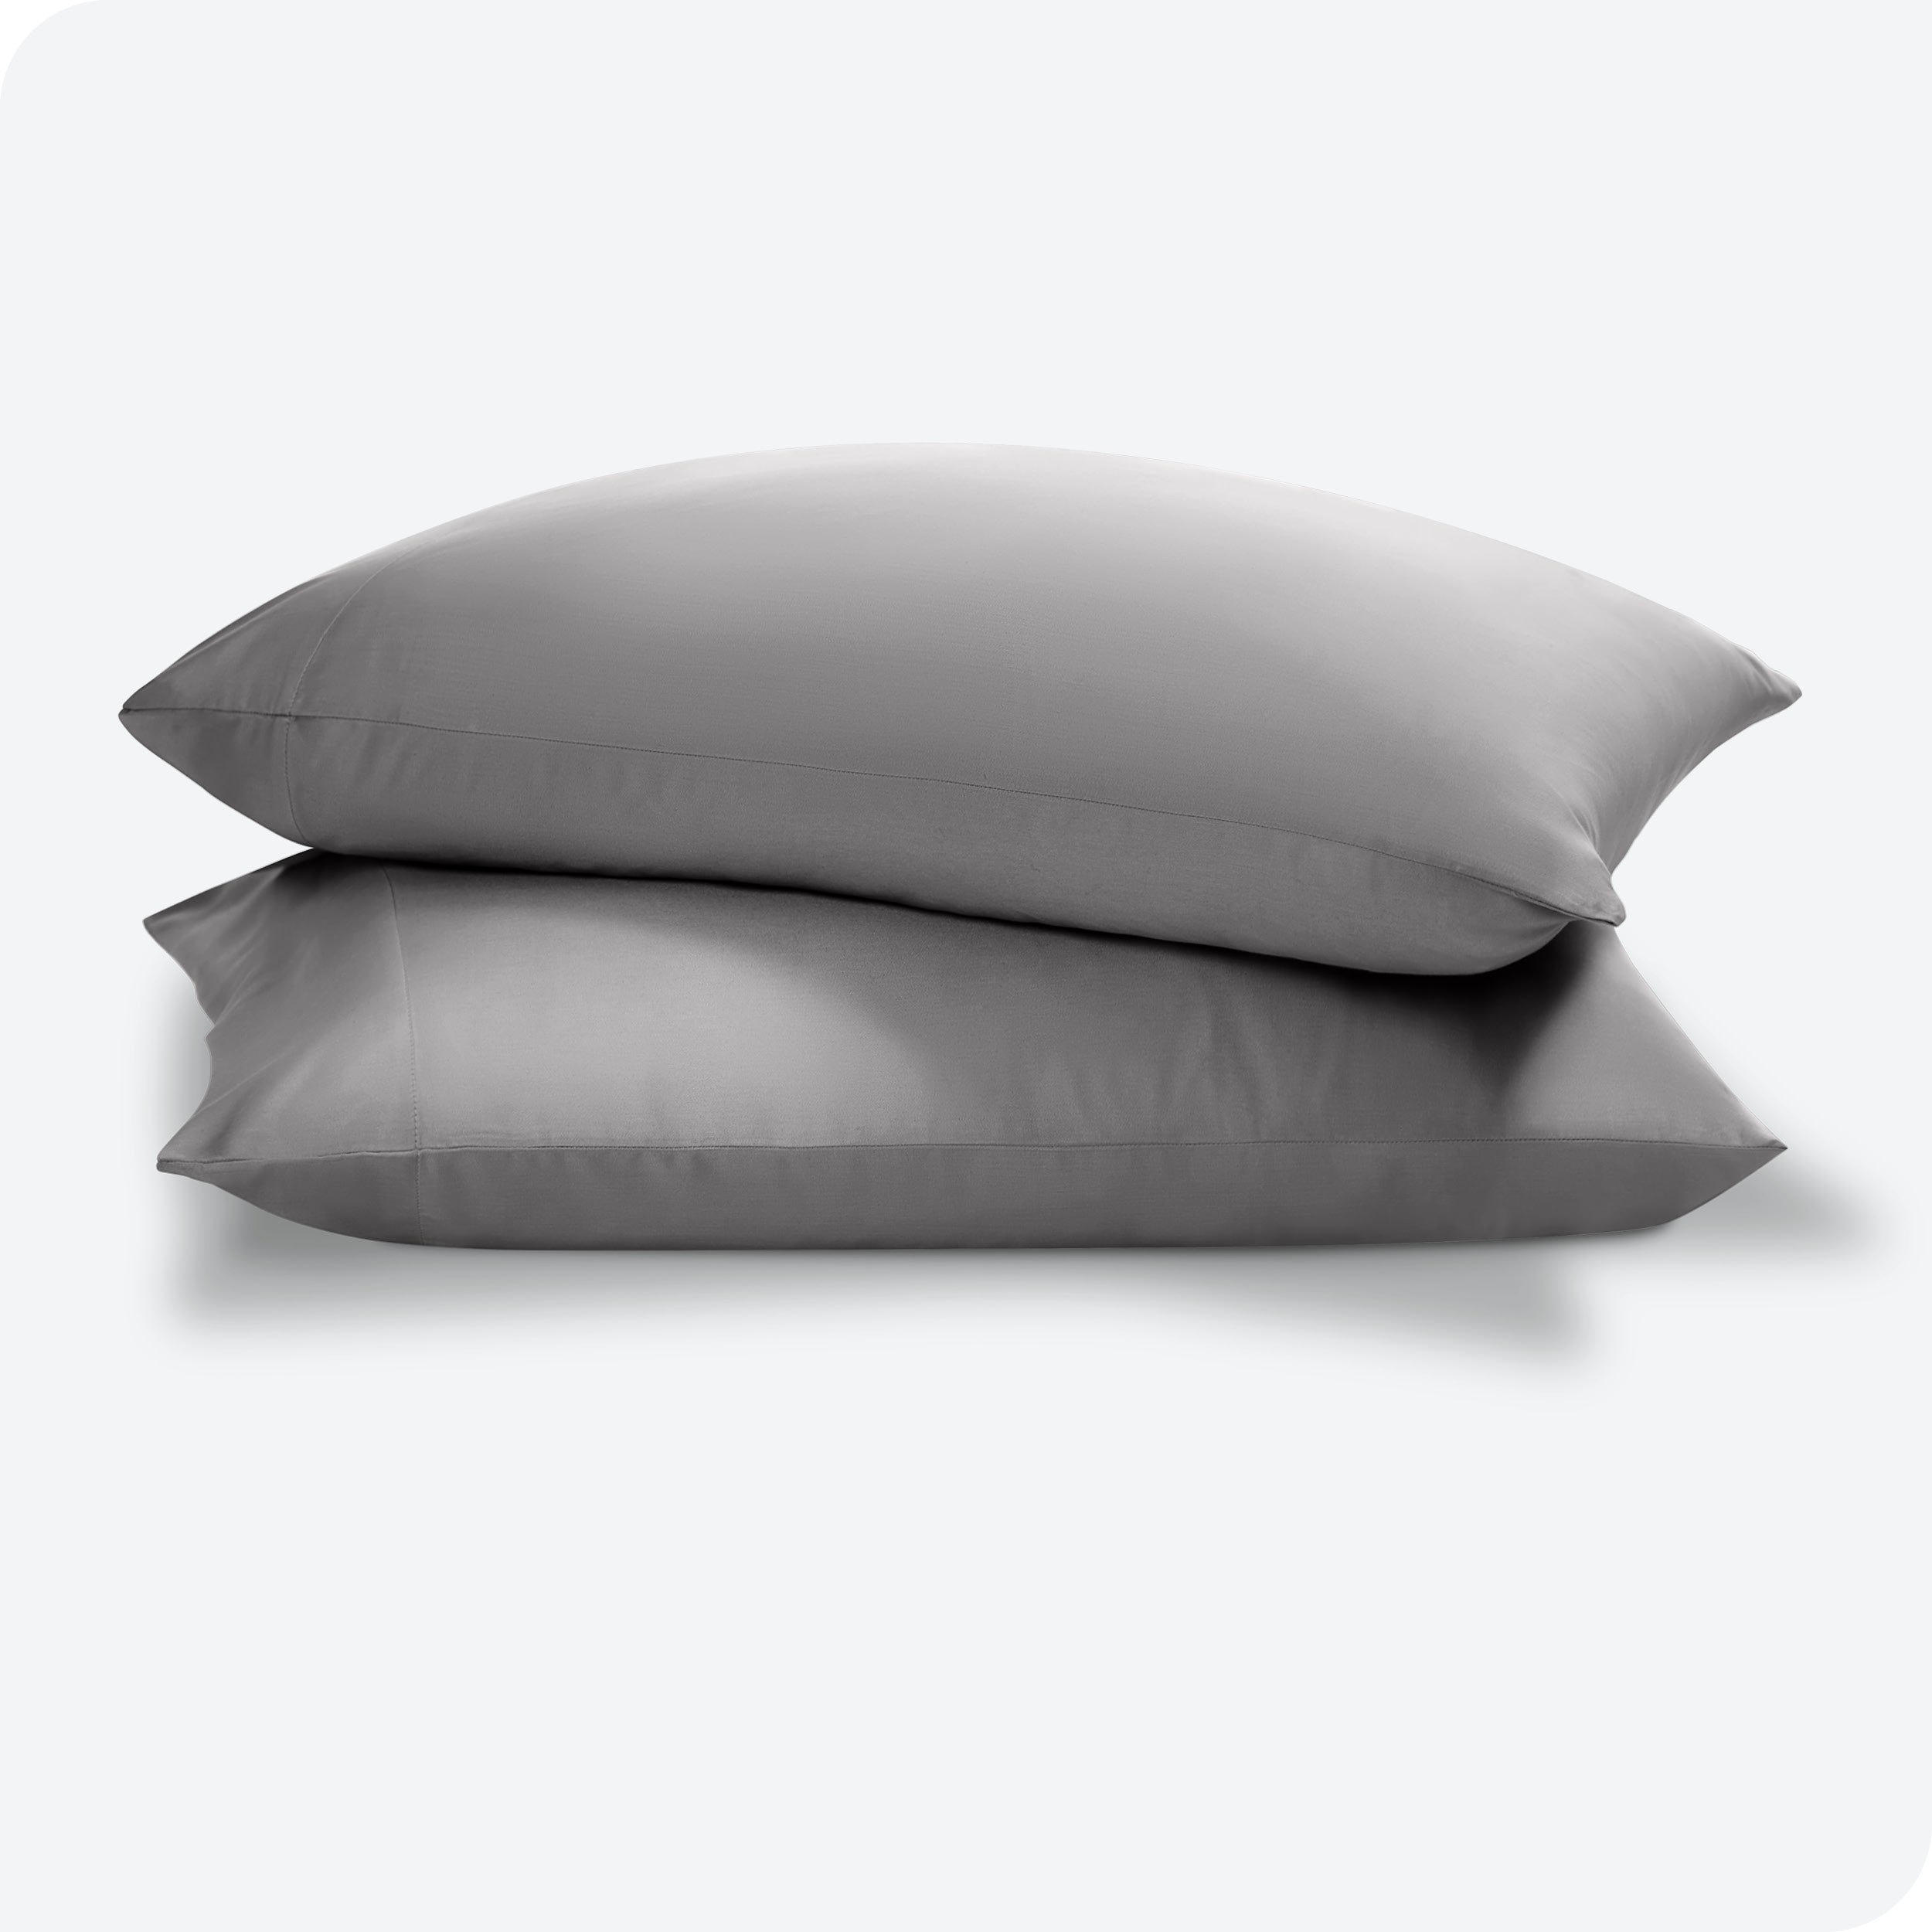 Two TENCEL™ pillowcases stacked